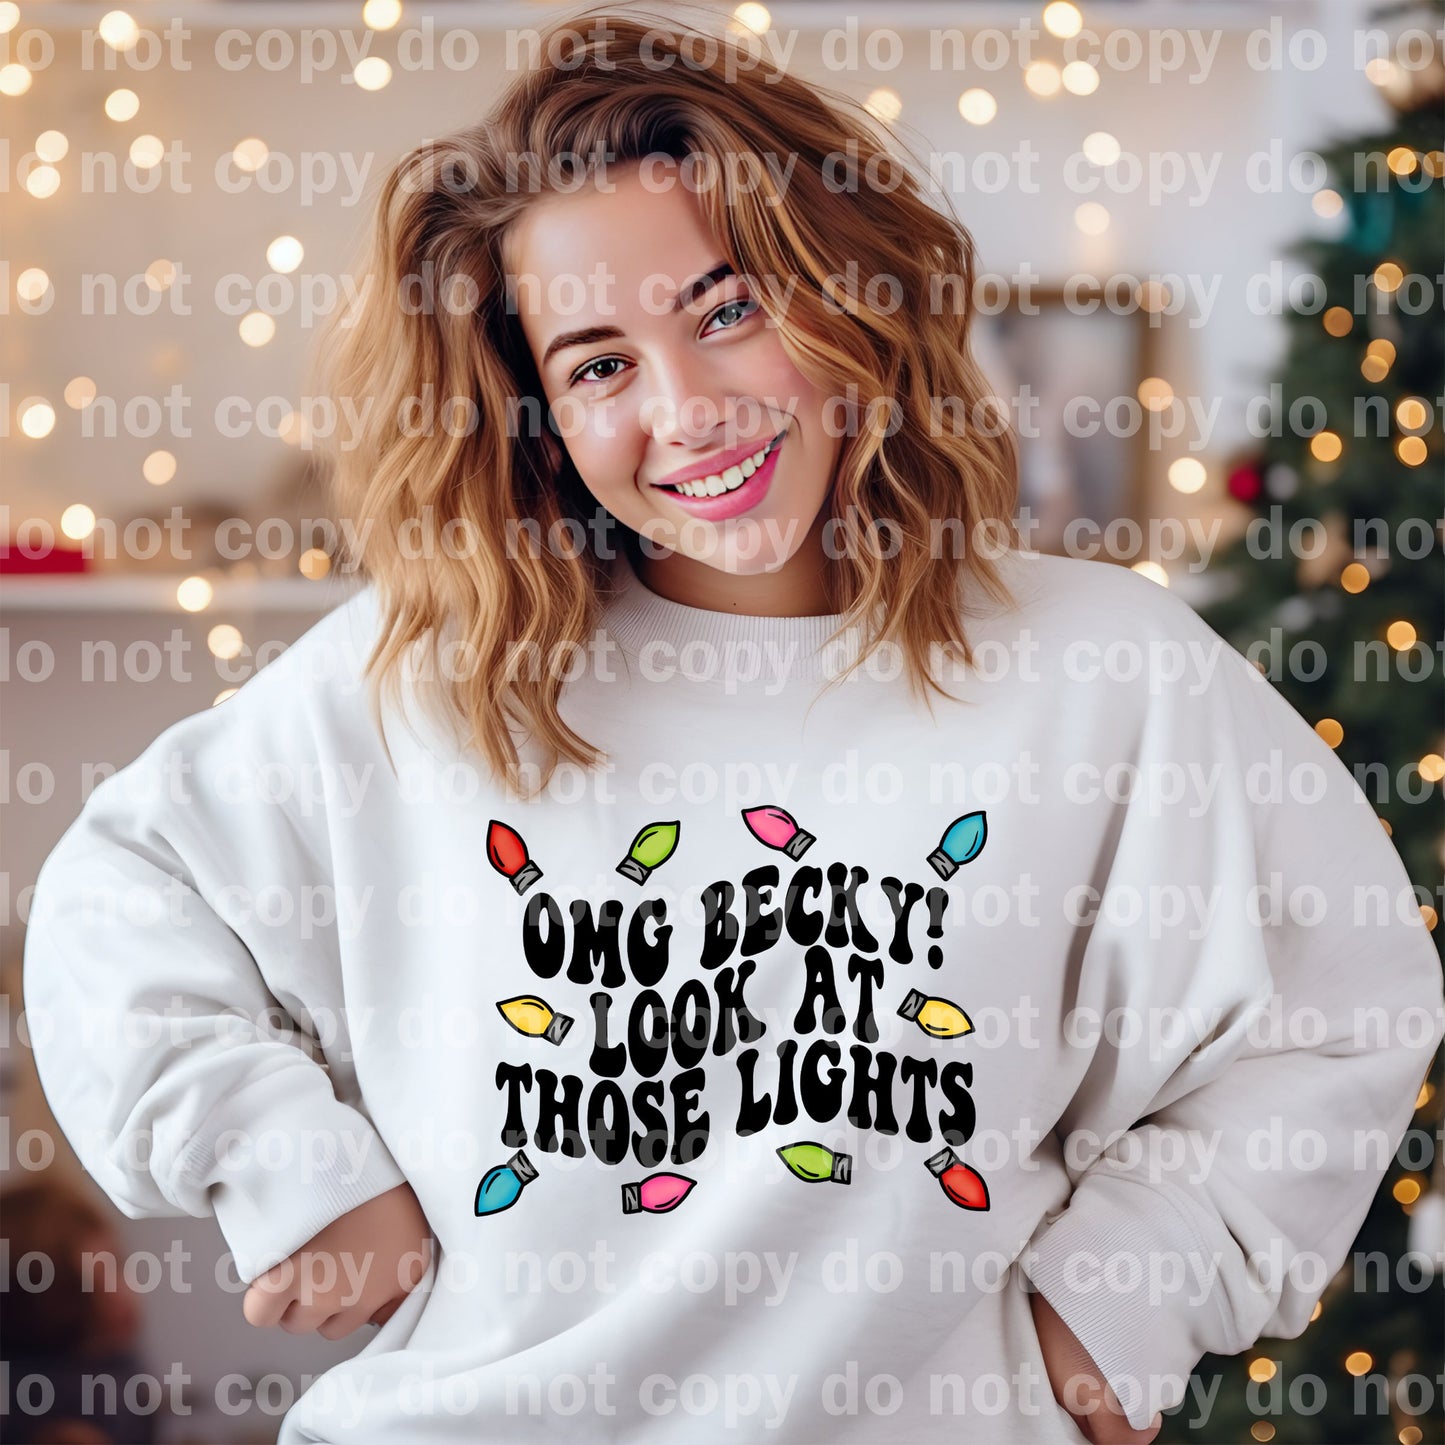 Omg Becky Look At Those Lights Full Color/One Color Dream Print or Sublimation Print